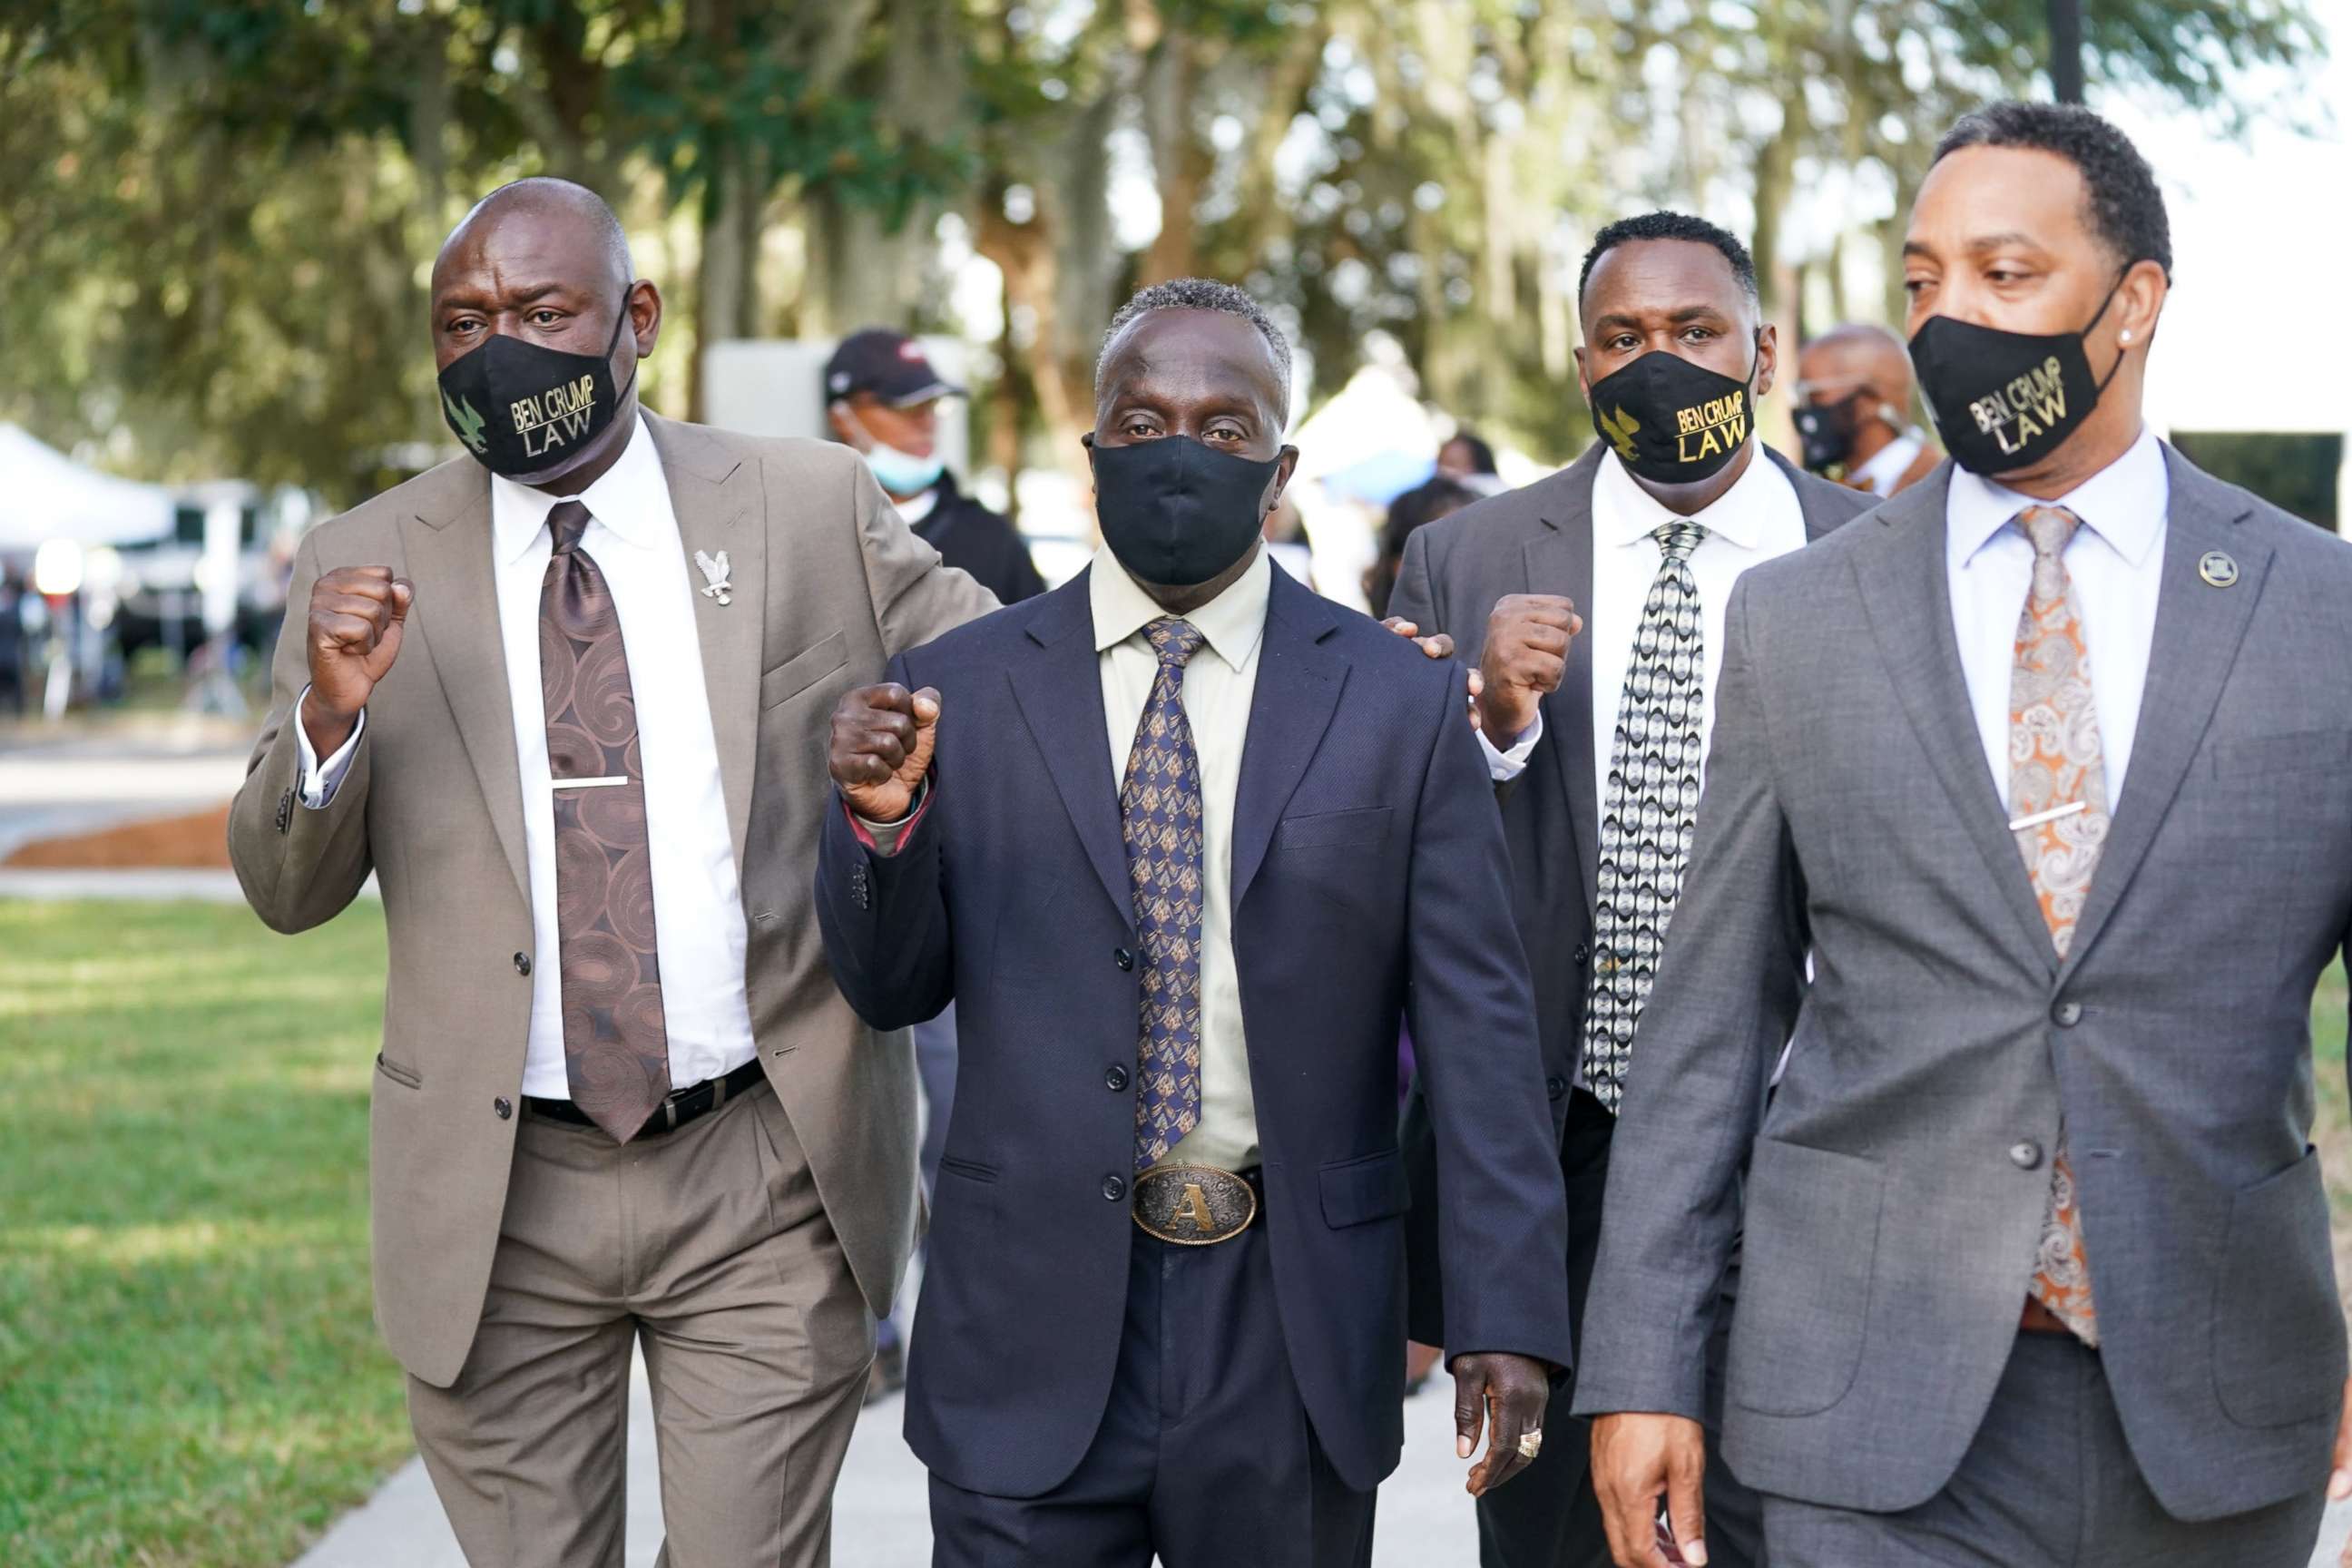 PHOTO: Attorney Ben Crump, left, and Marcus Arbery Sr., the father of Ahmaud Arbery, second from left, arrive at the Glynn County Courthouse as jury selection begins for the trial of the shooting death of Ahmaud Arbery on Oct. 18, 2021, in Brunswick, Ga.